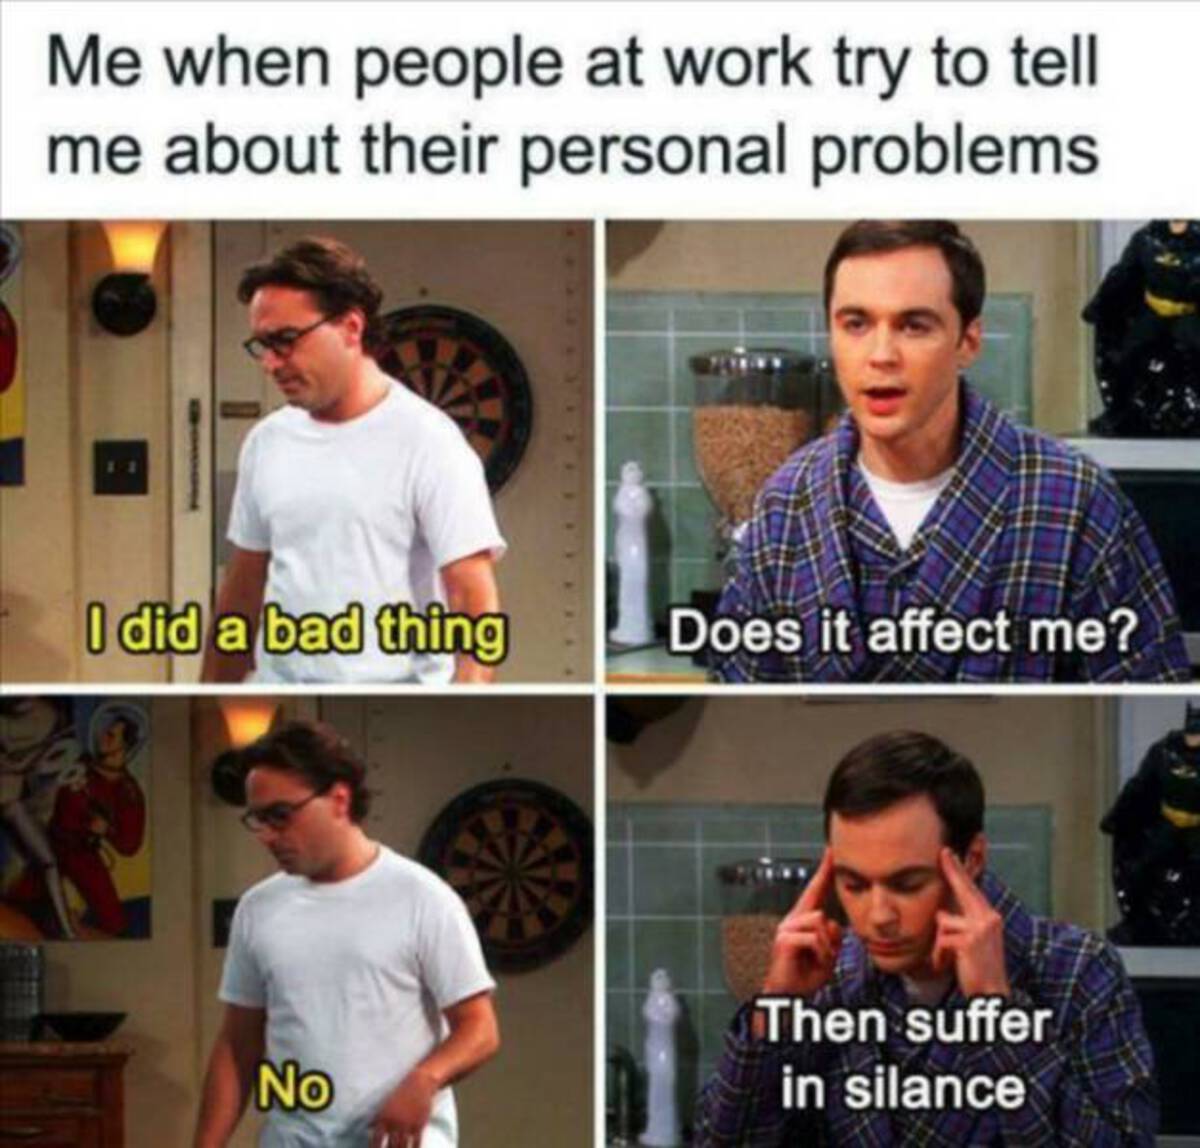 big bang theory work memes - Me when people at work try to tell me about their personal problems 11 I did a bad thing Does it affect me? No Then suffer in silance